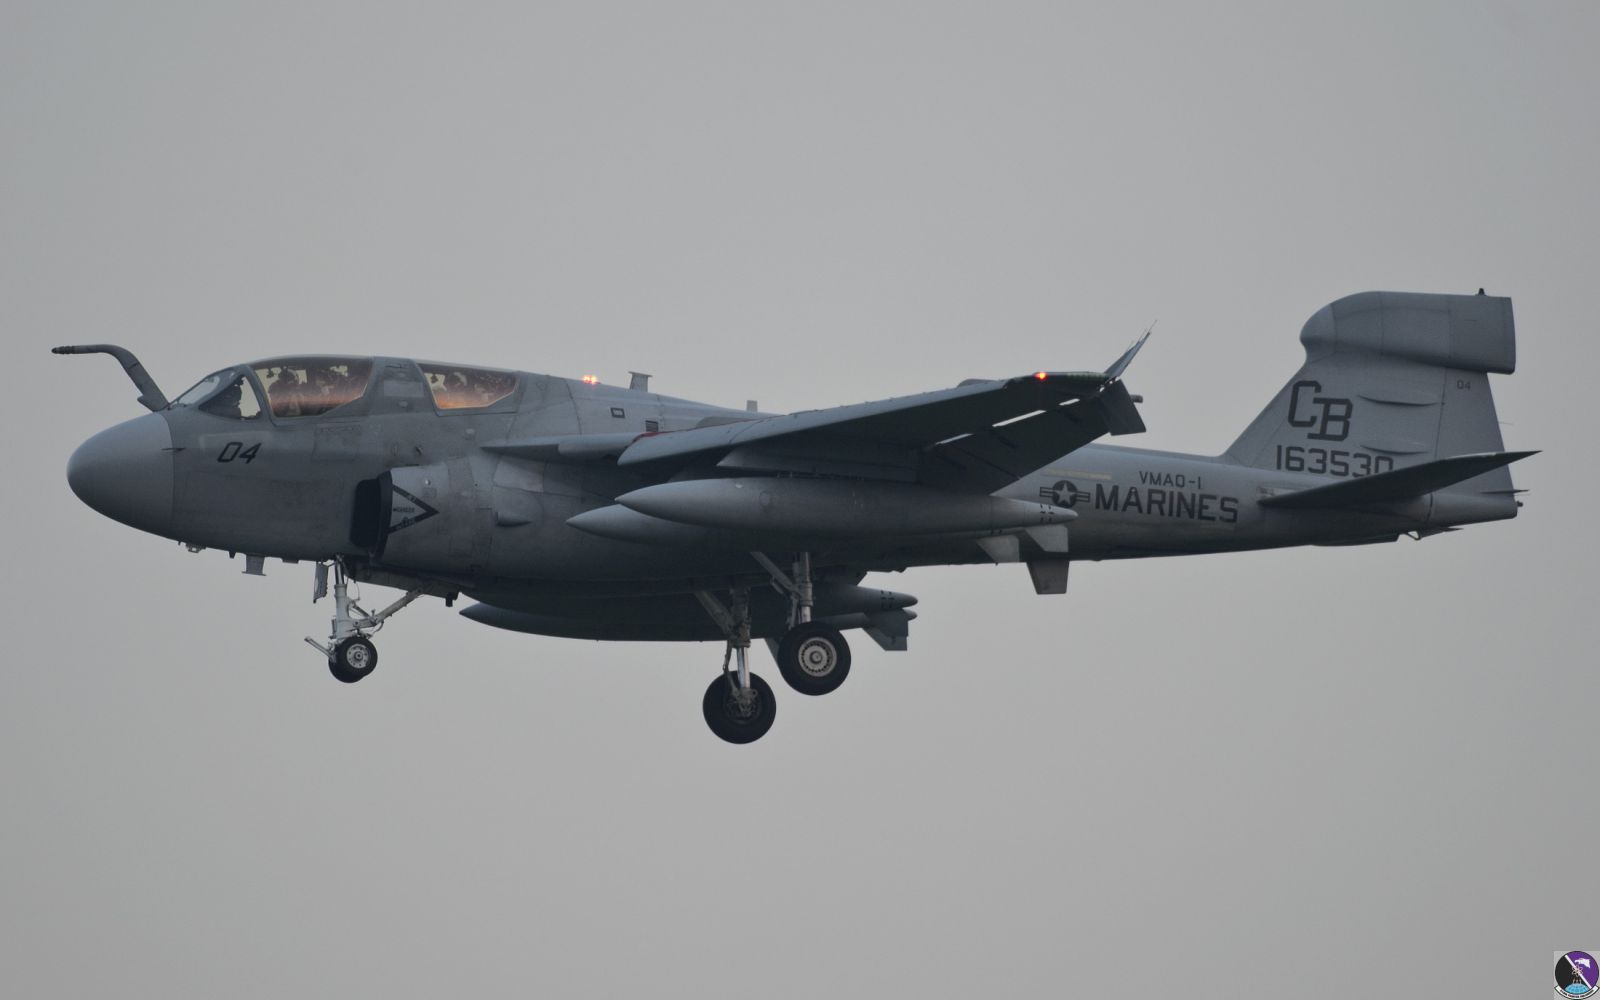 aviano september 10  2011 trend31 ea 6b 163530 04  cb  vmaq 1 mcas cherry point  nc banshee come from homebase for deployment